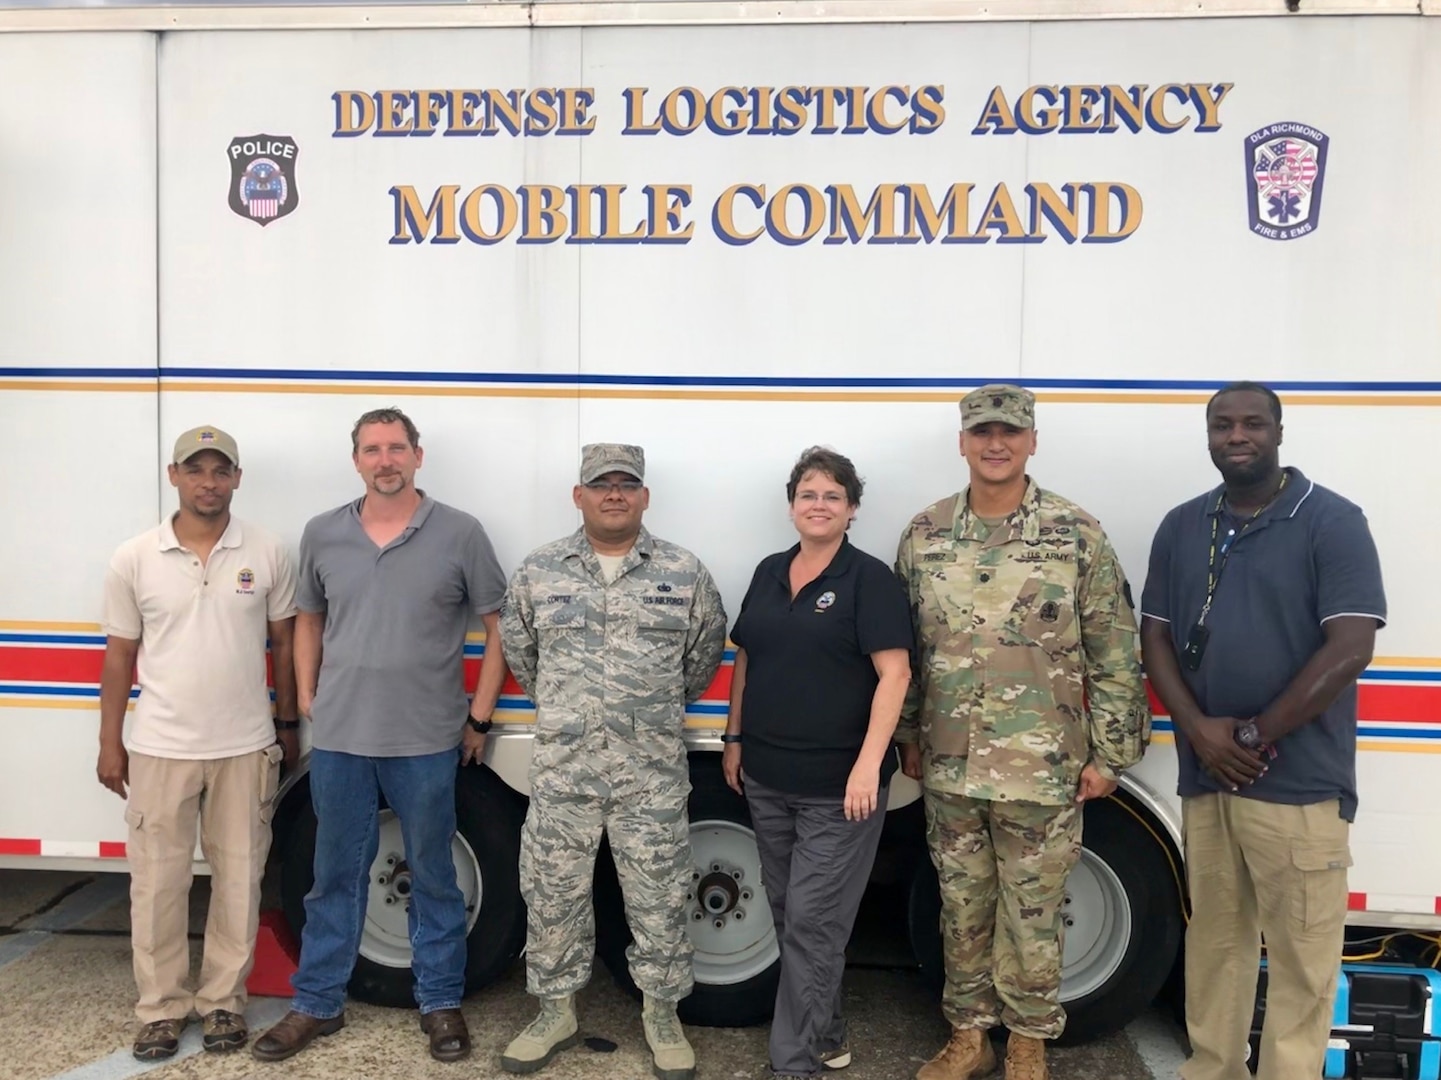 Military and civilian personnel stand in front of a mobile command vehicle